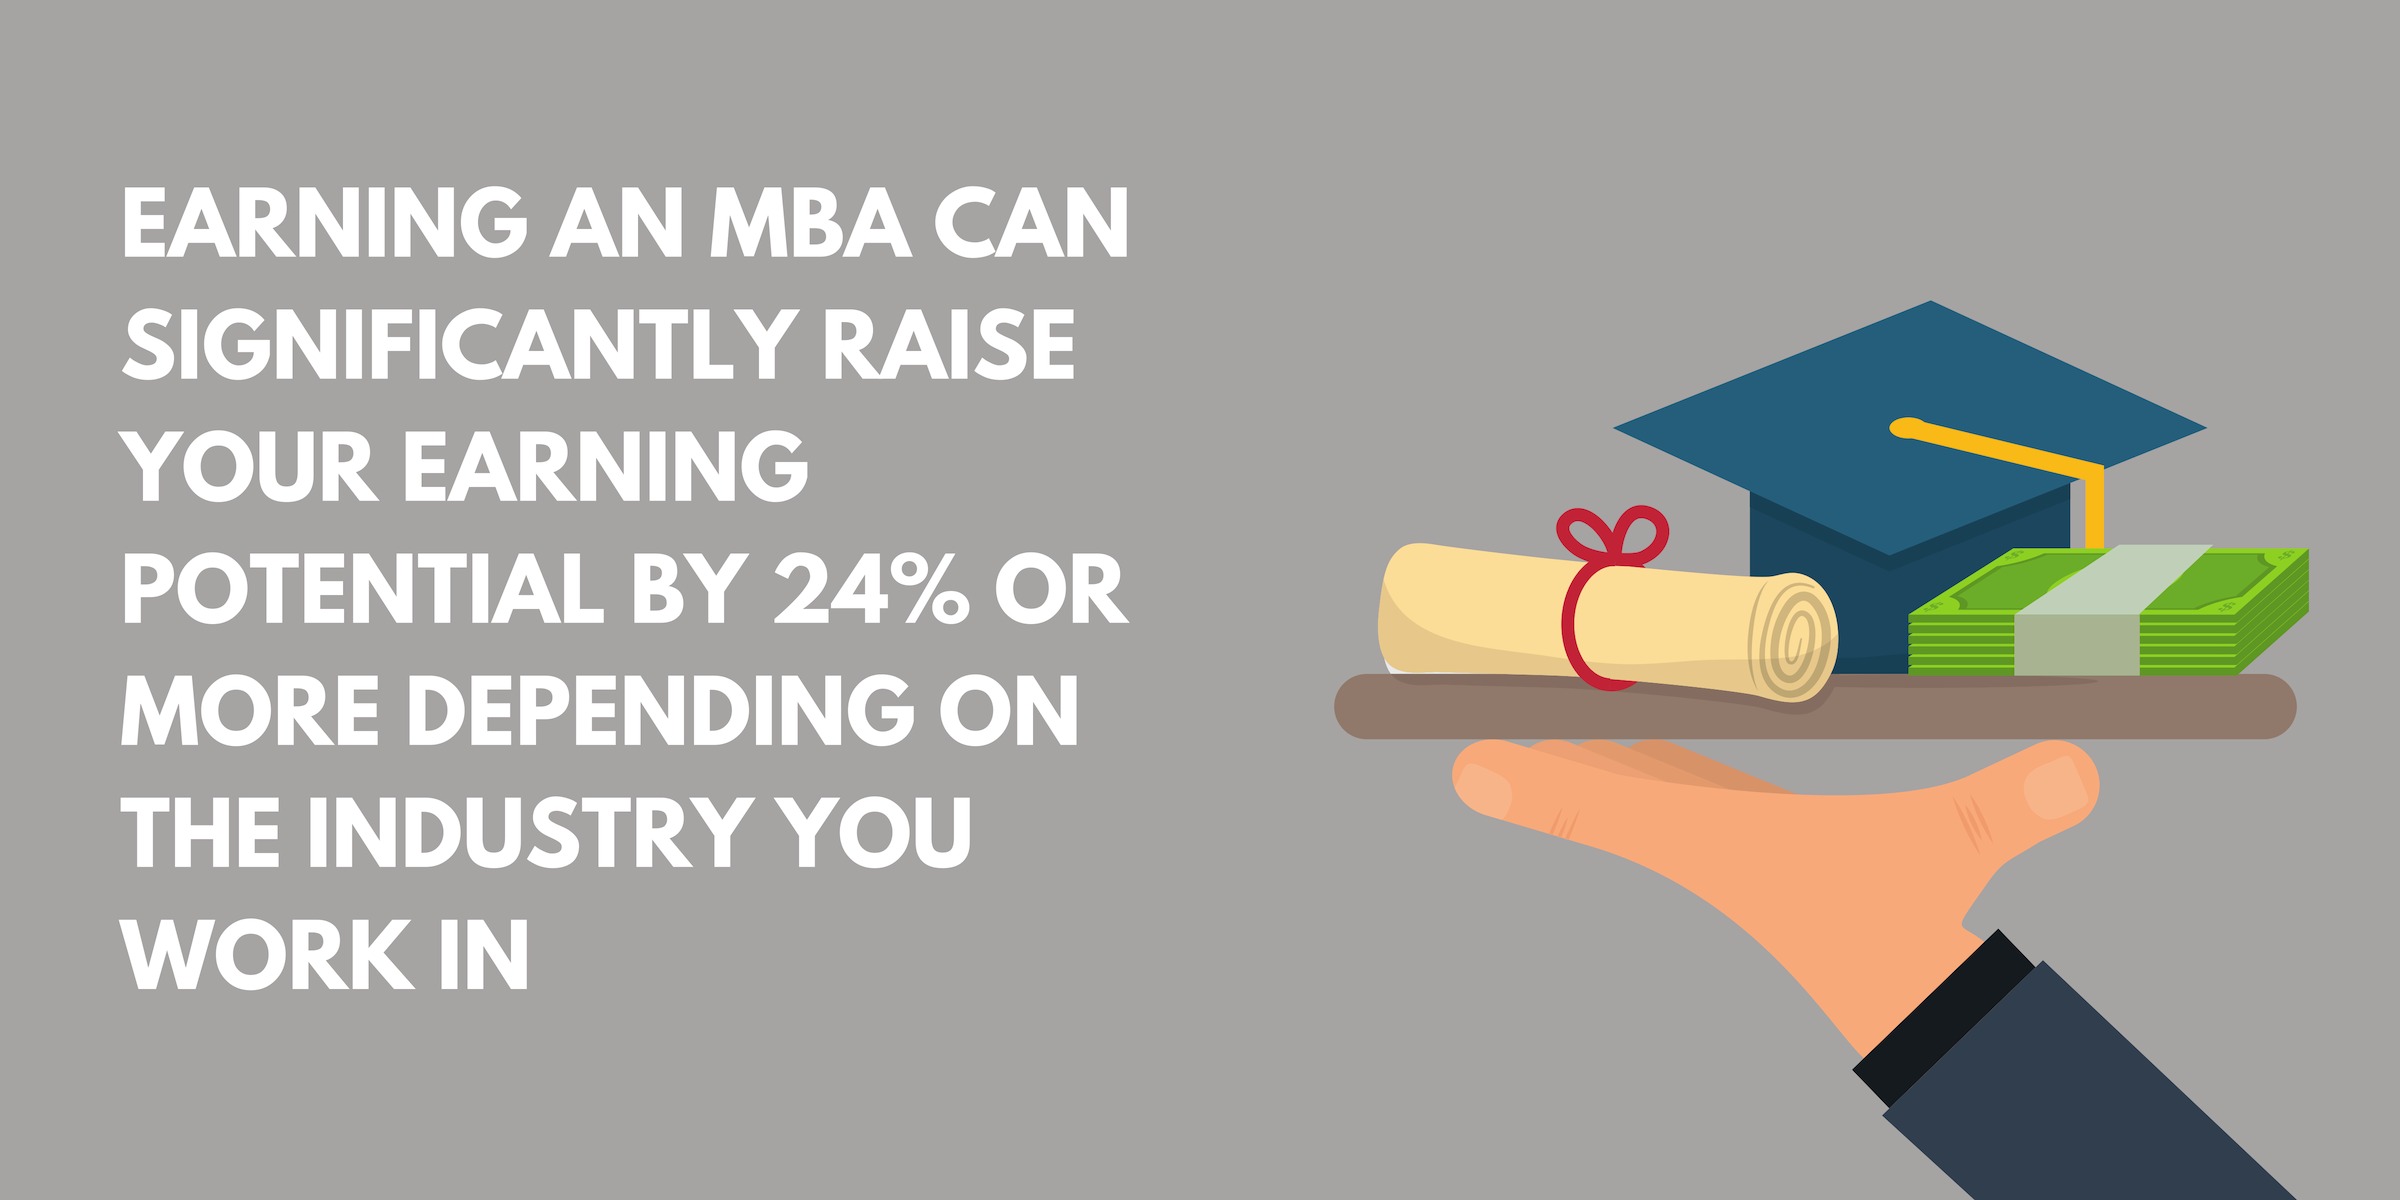 Earning an MBA can significantly raise your earning potential by 24% or more depending on the industry you work in 